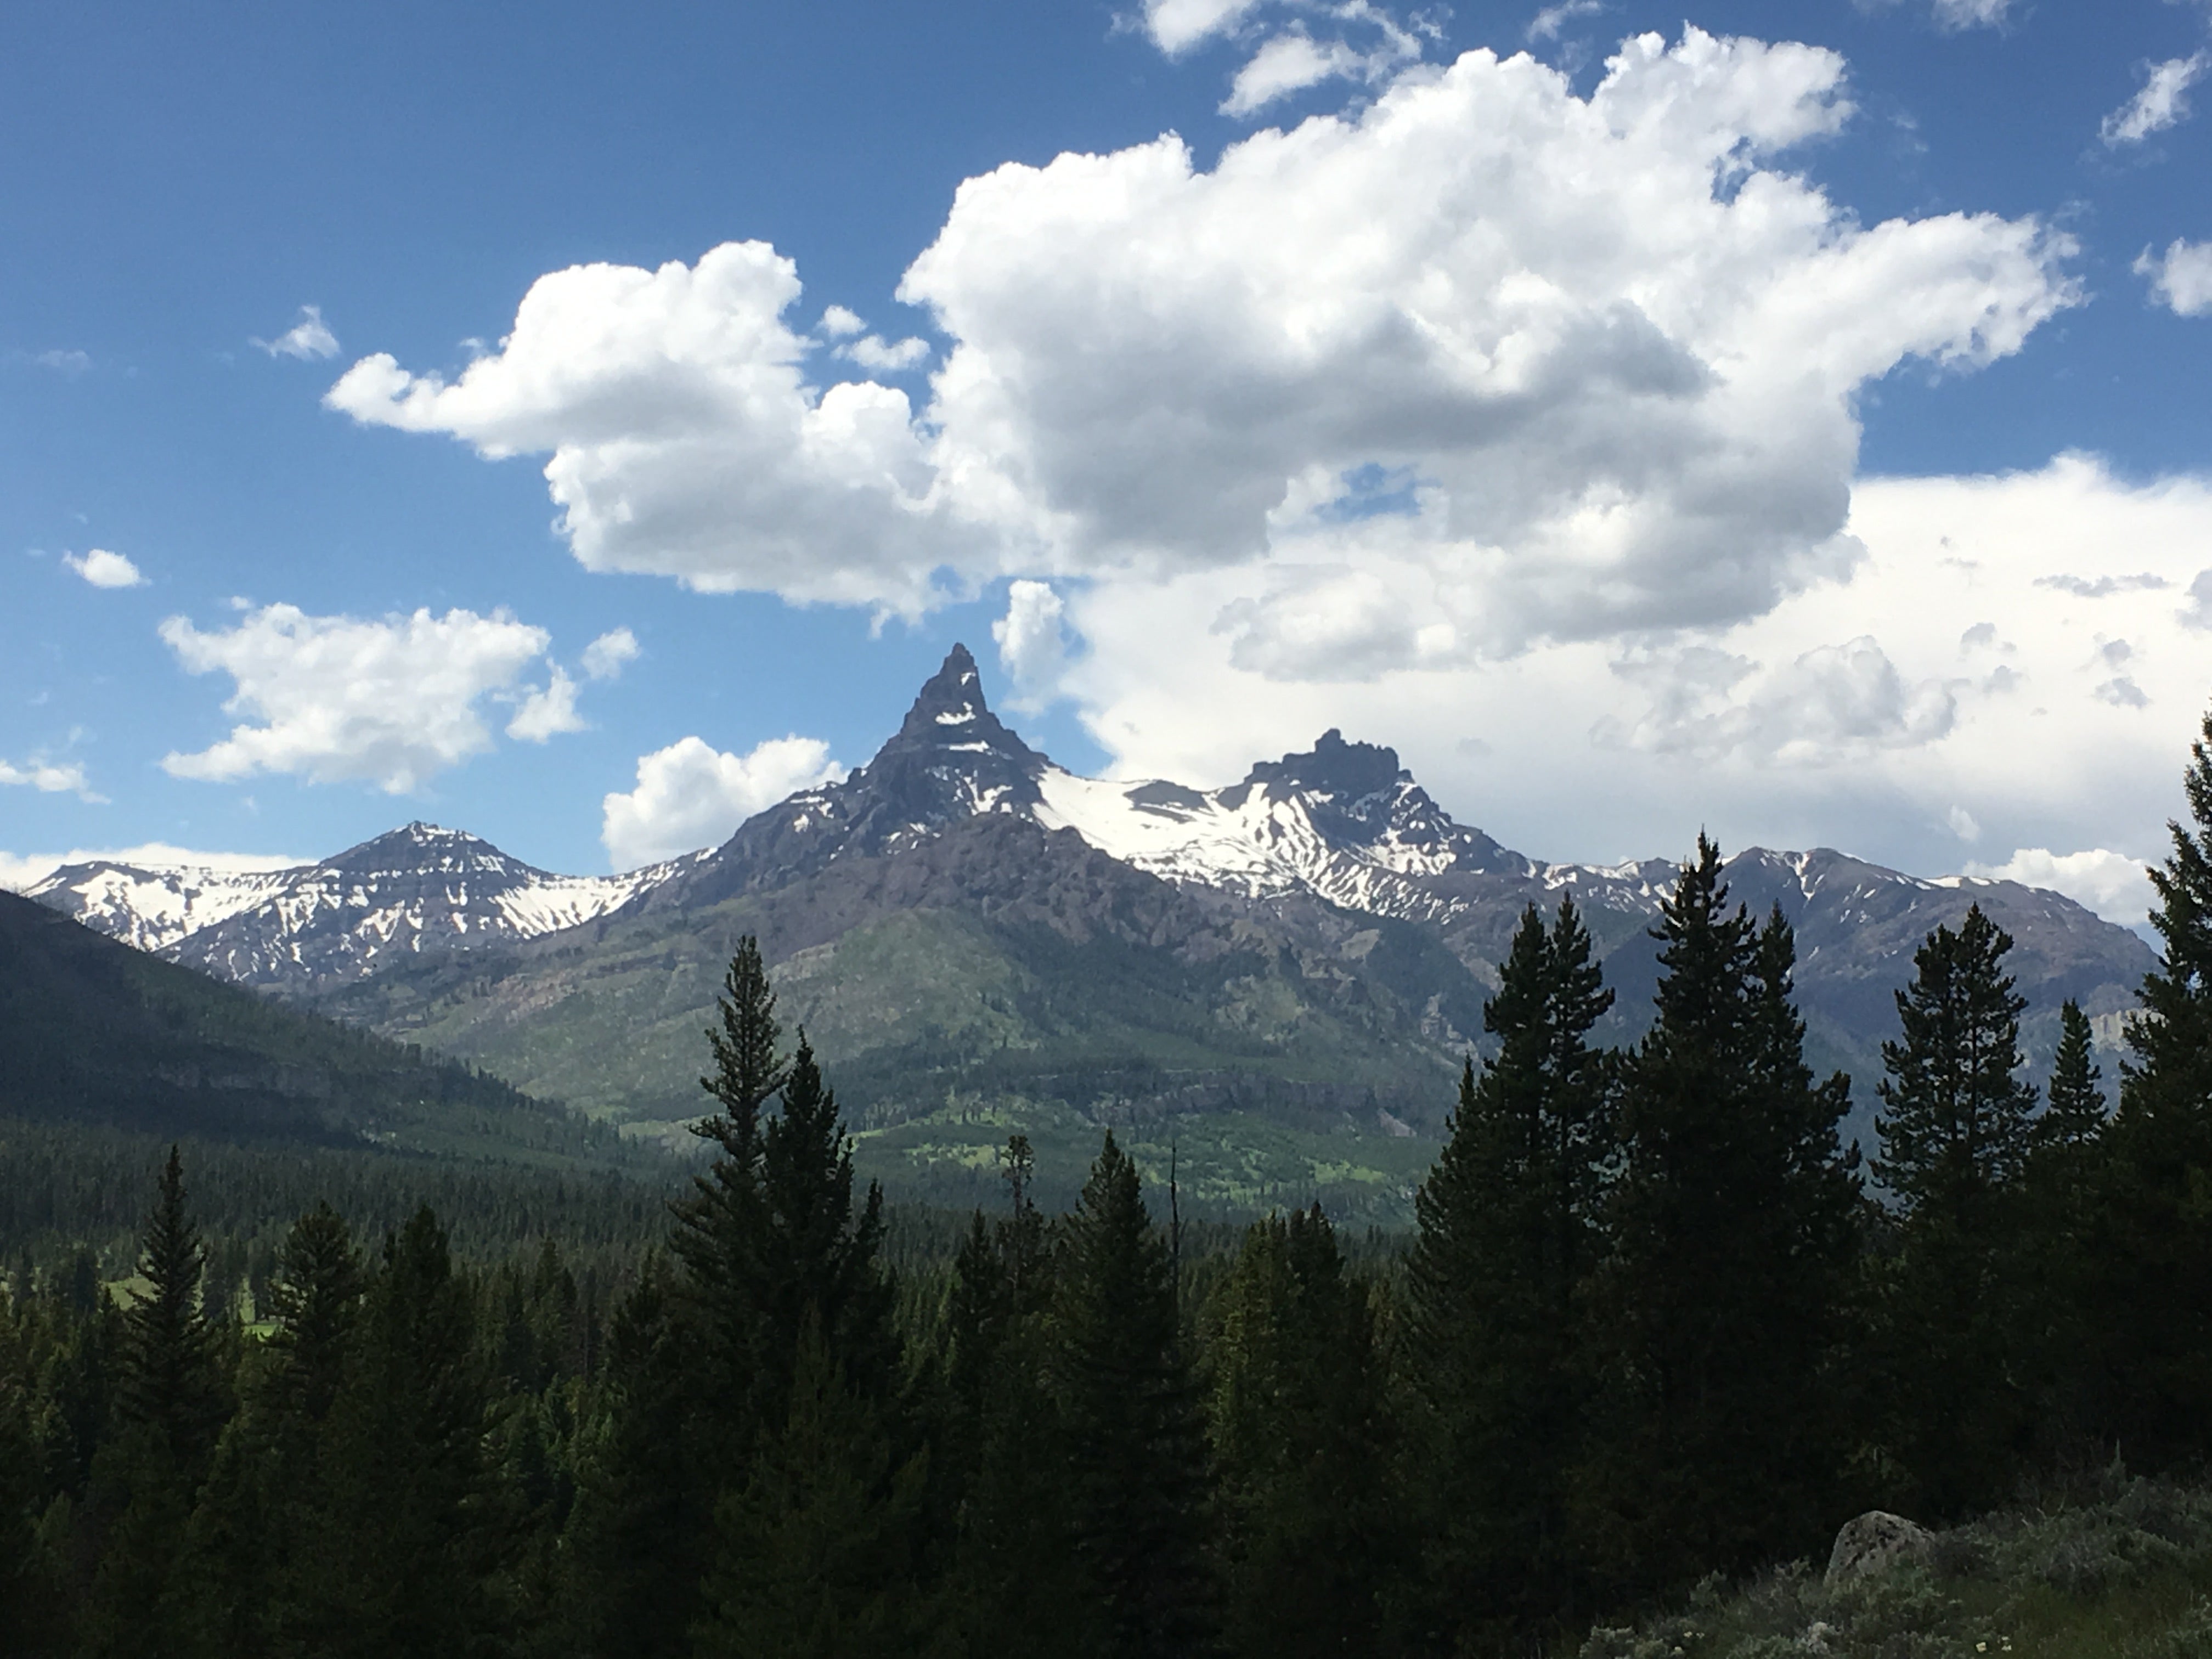 Spectacular views of the Beartooth Mountains